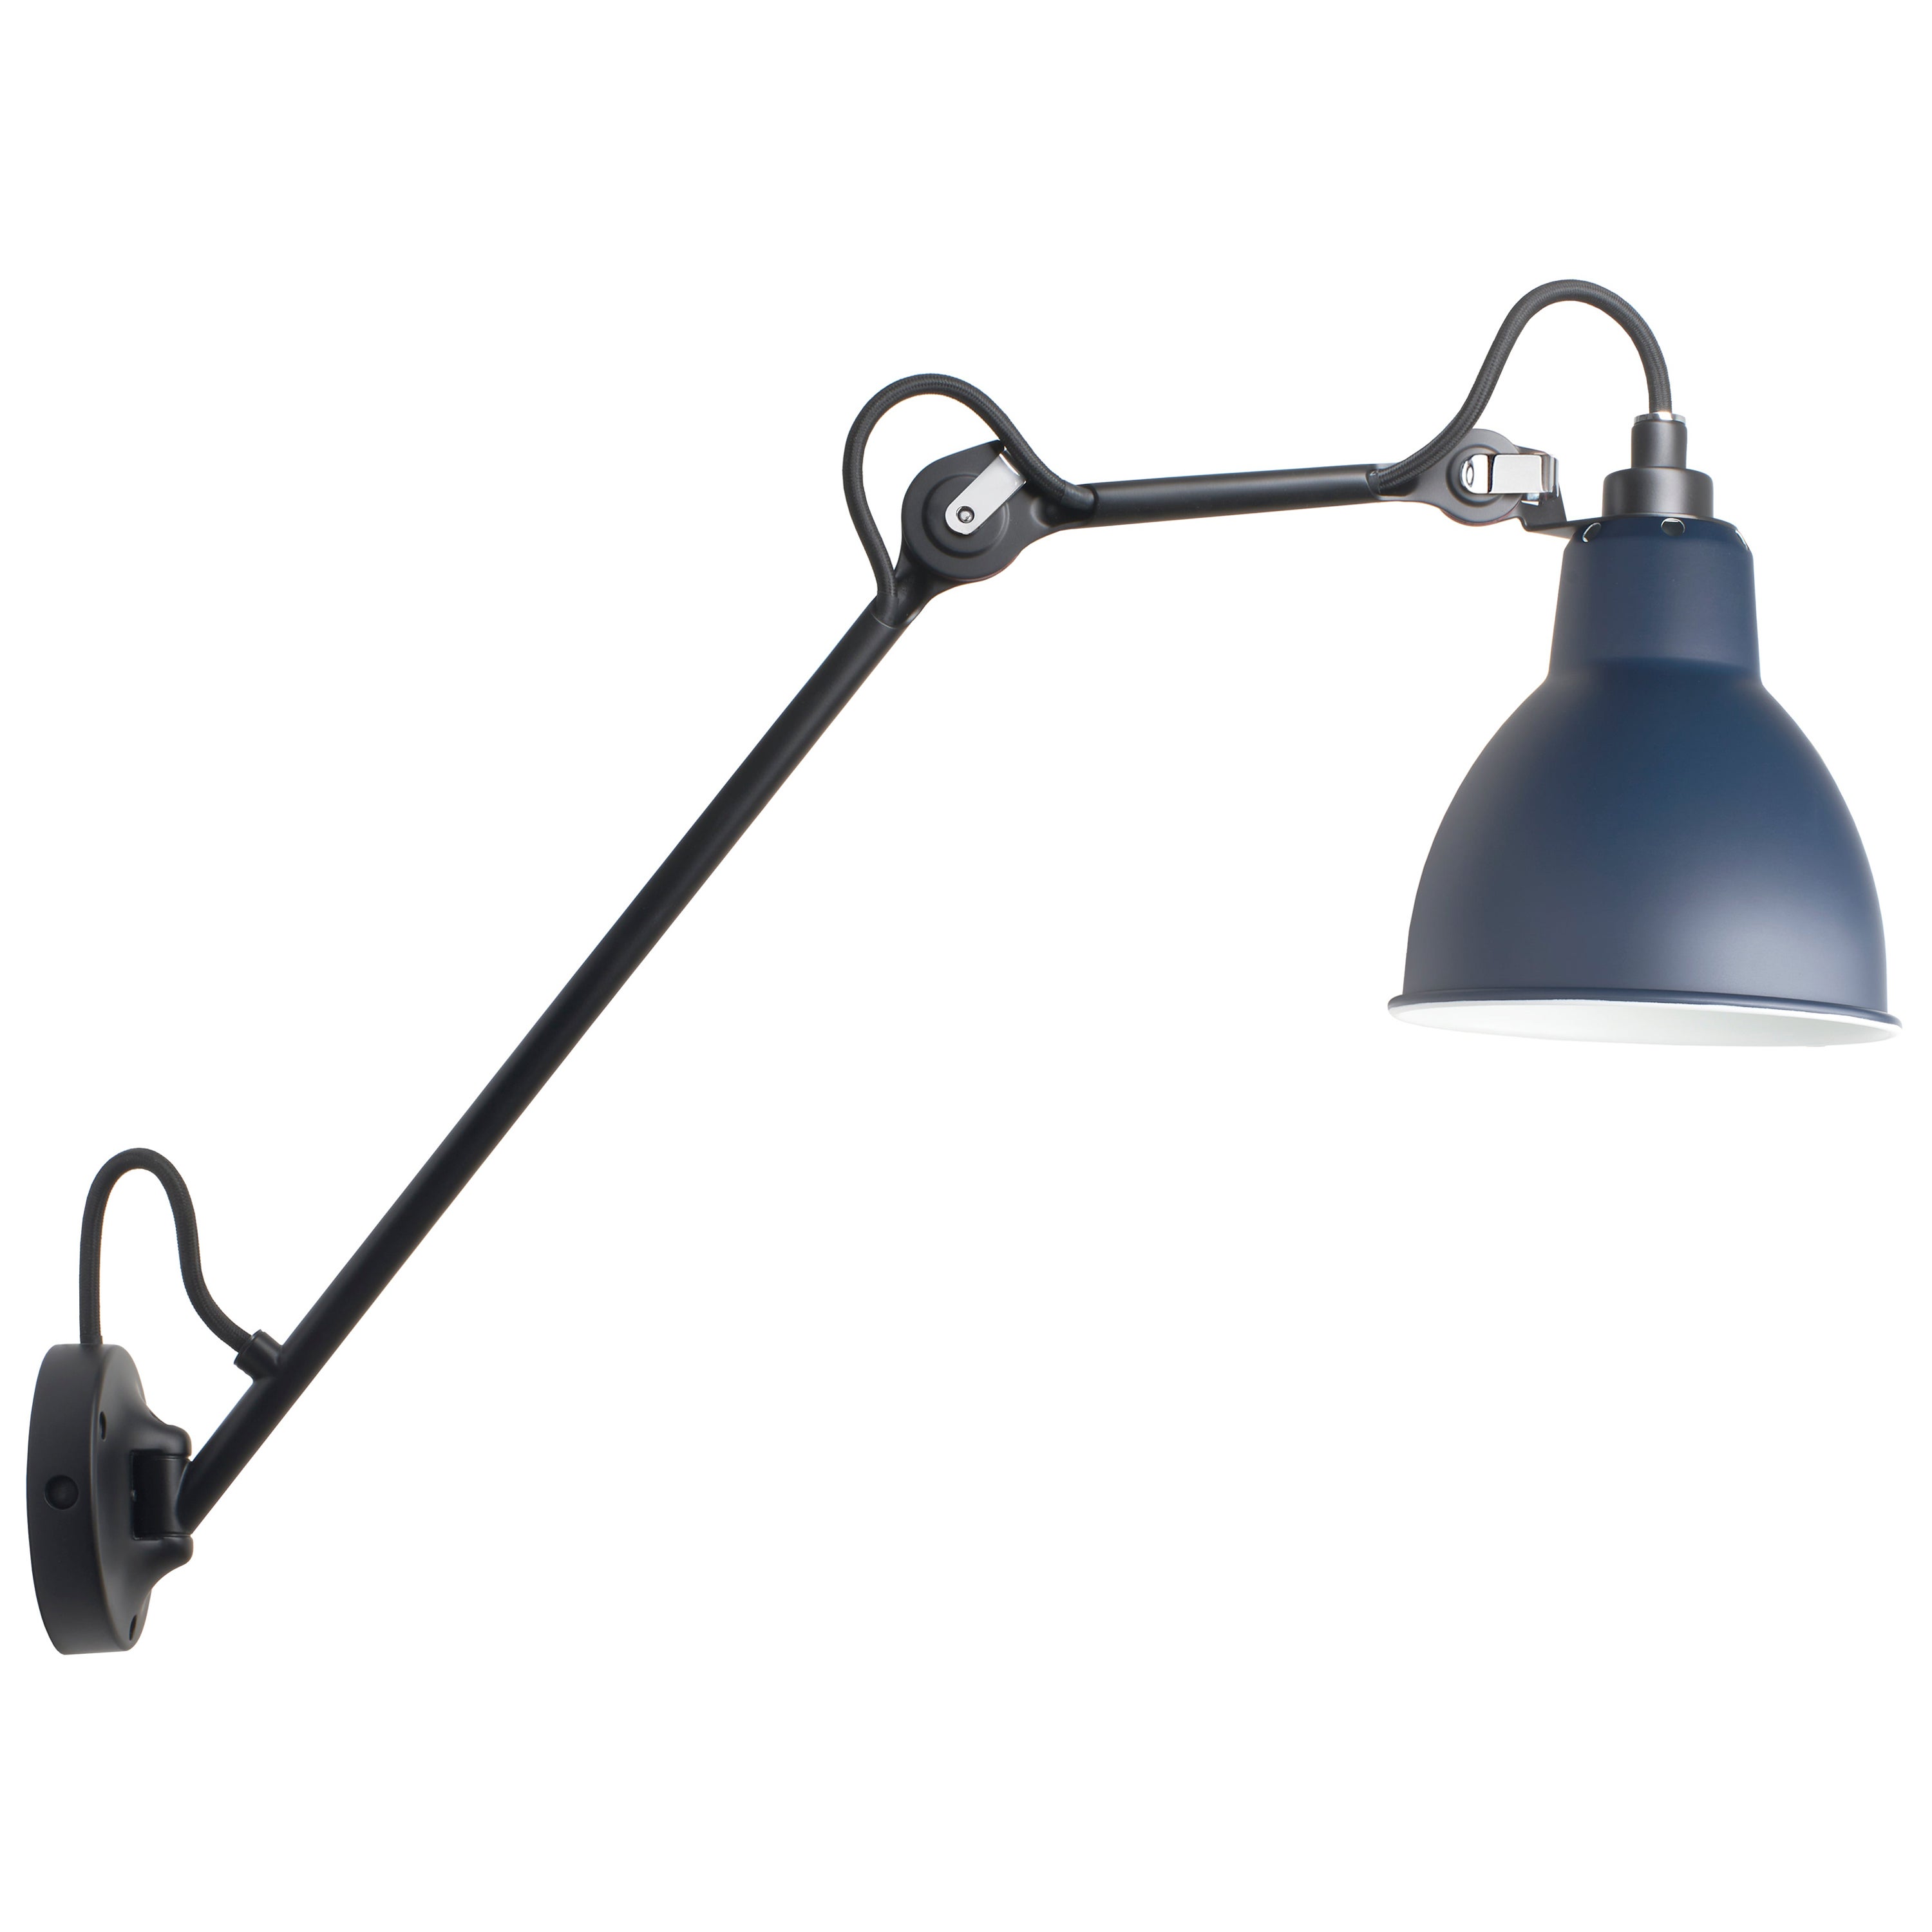 DCW Editions La Lampe Gras N°122 Wall Lamp in Black Arm and Blue Shade For Sale